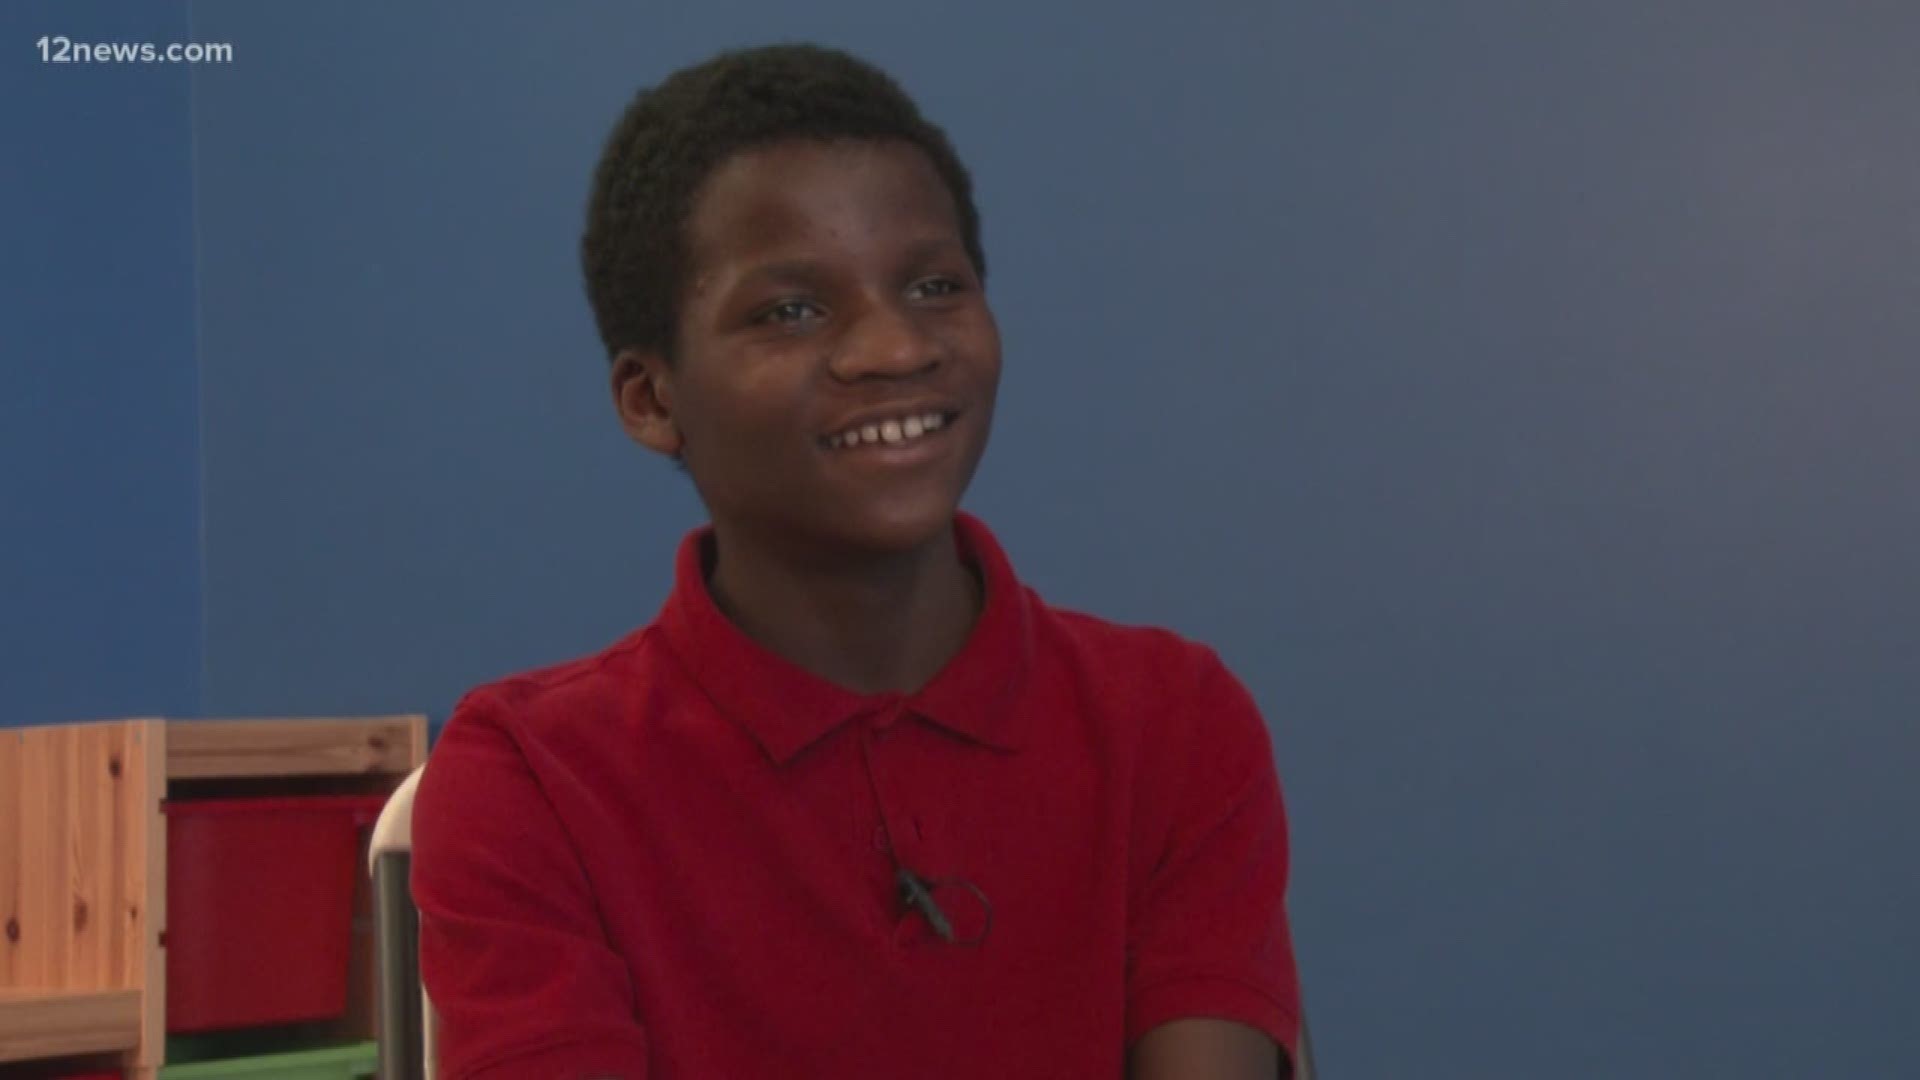 Meet Leontae, a nine-year-old boy who loves building with Legos and would love to be part of building a forever family.